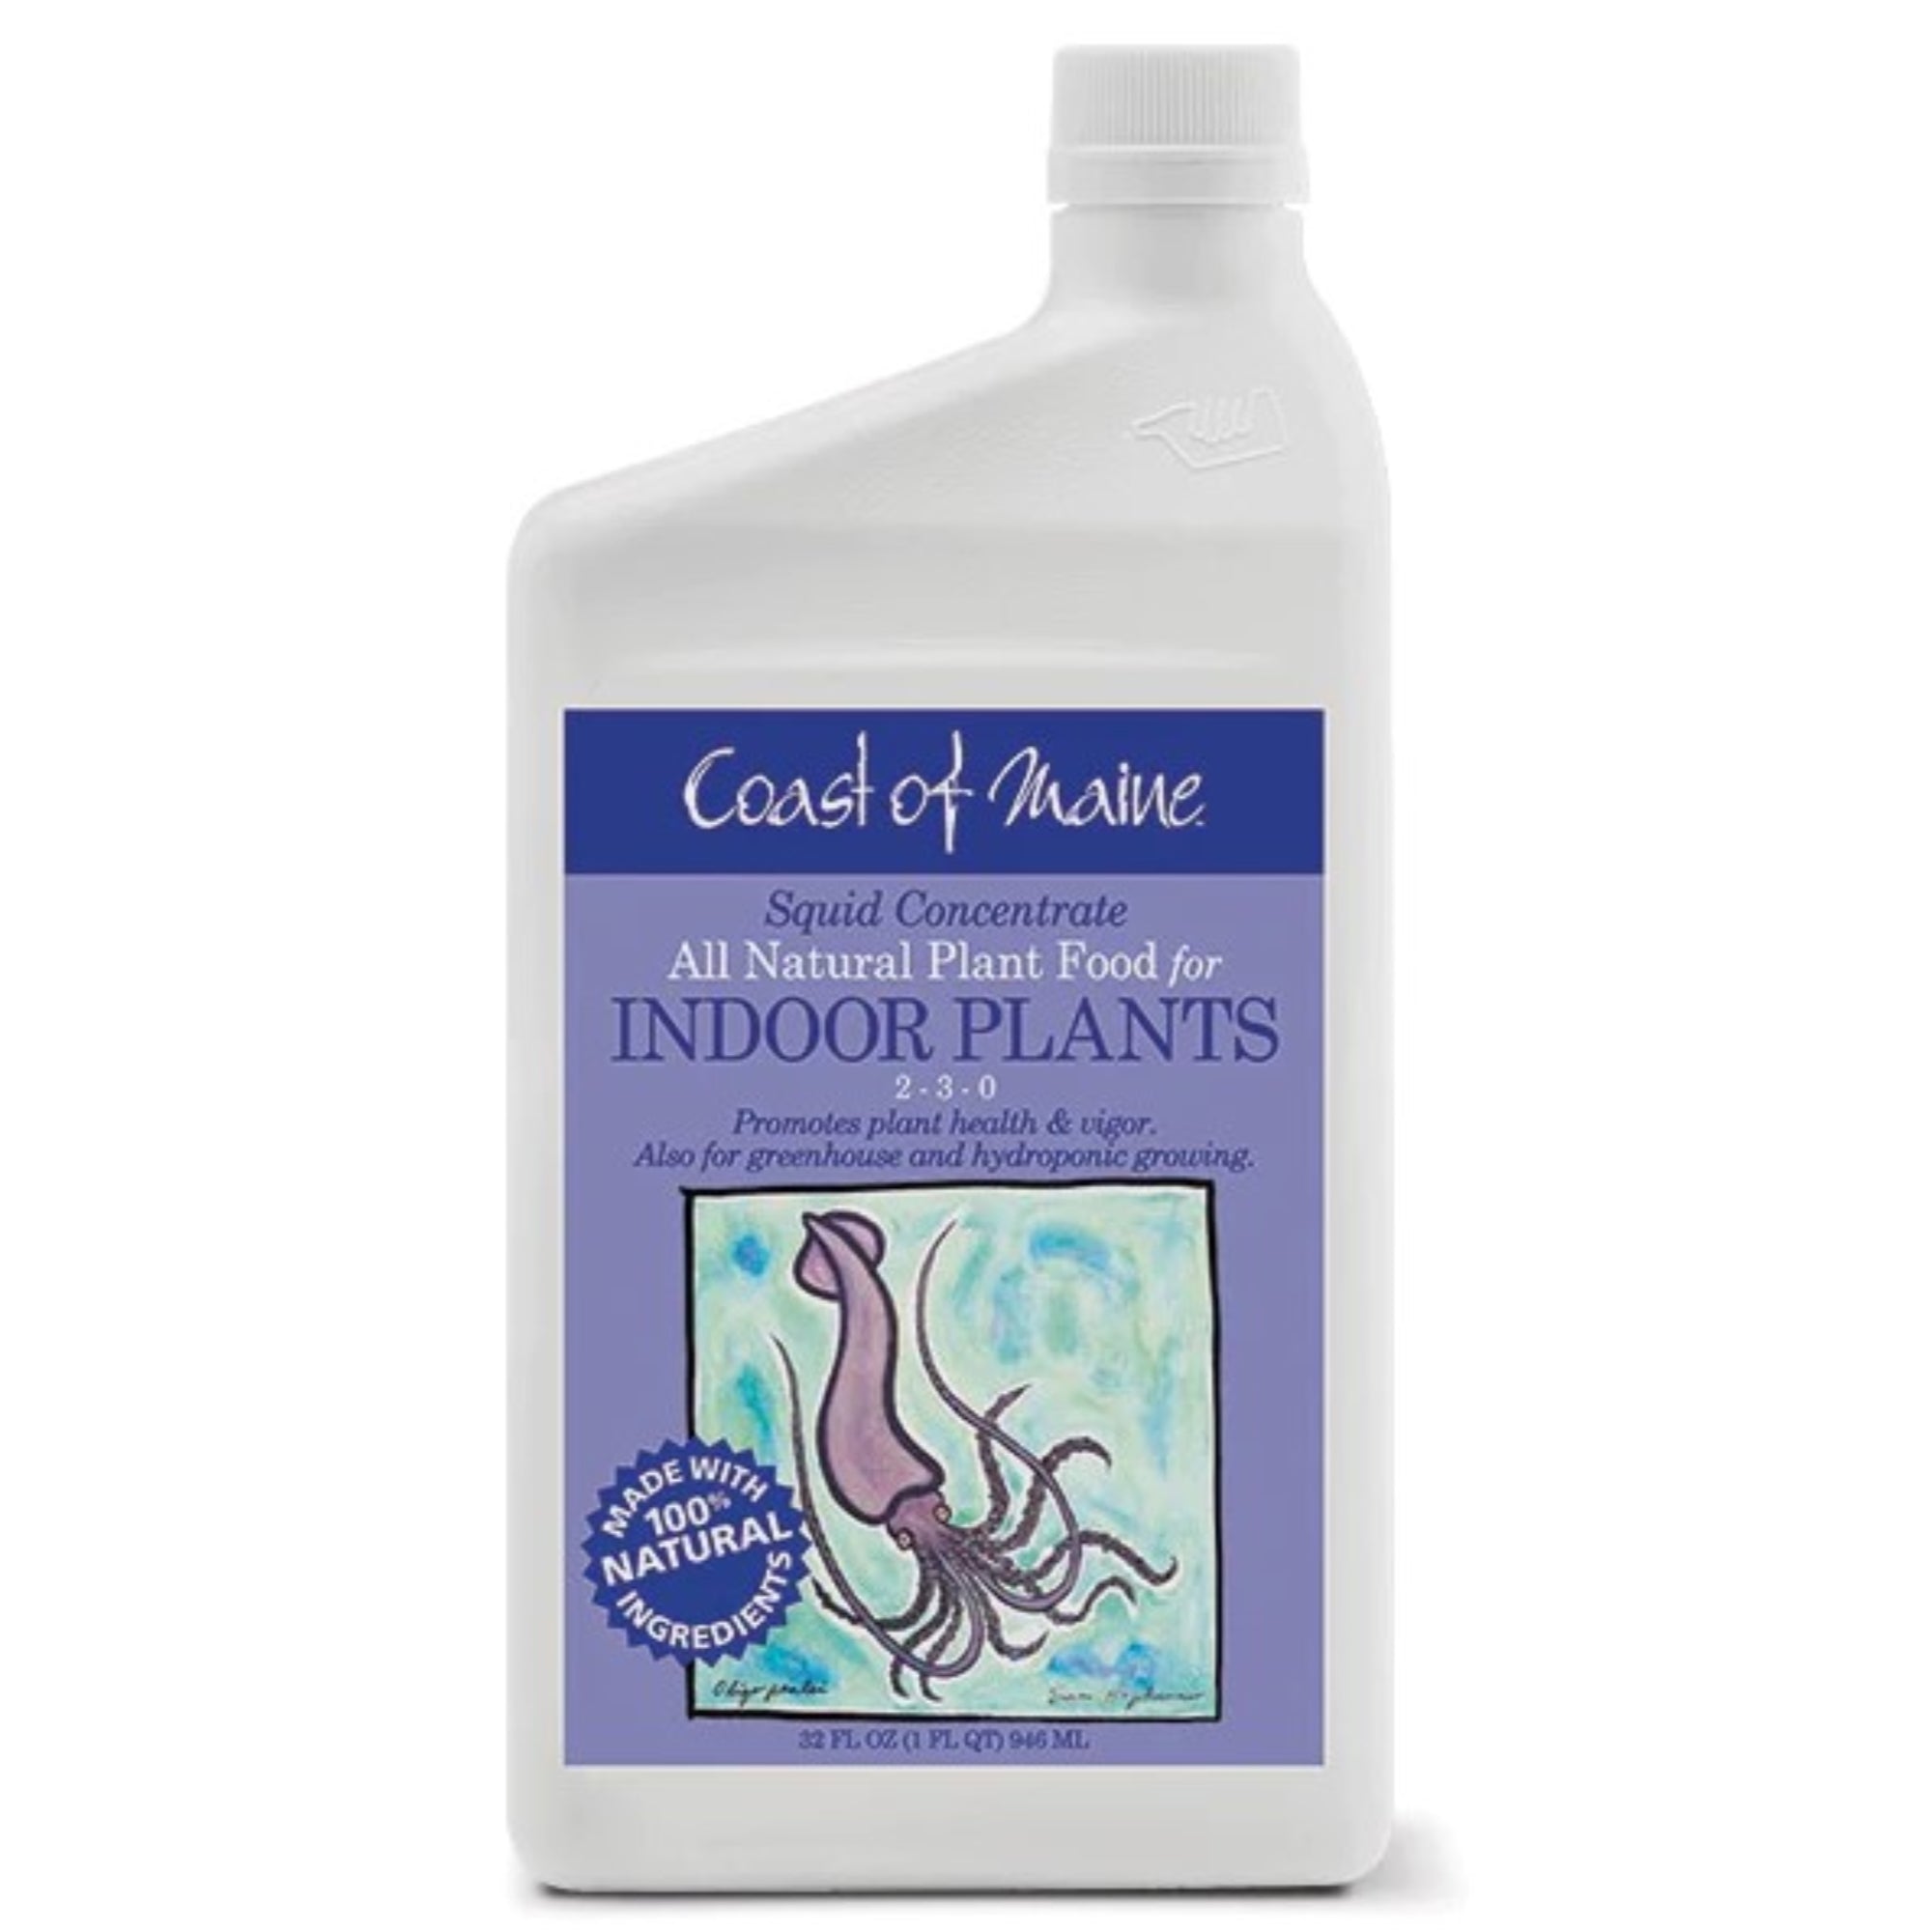 Coast of Maine 2-3-0 Squid Liquid Concentrate All Natural Plant Food for Indoor Plants, 32 fl oz